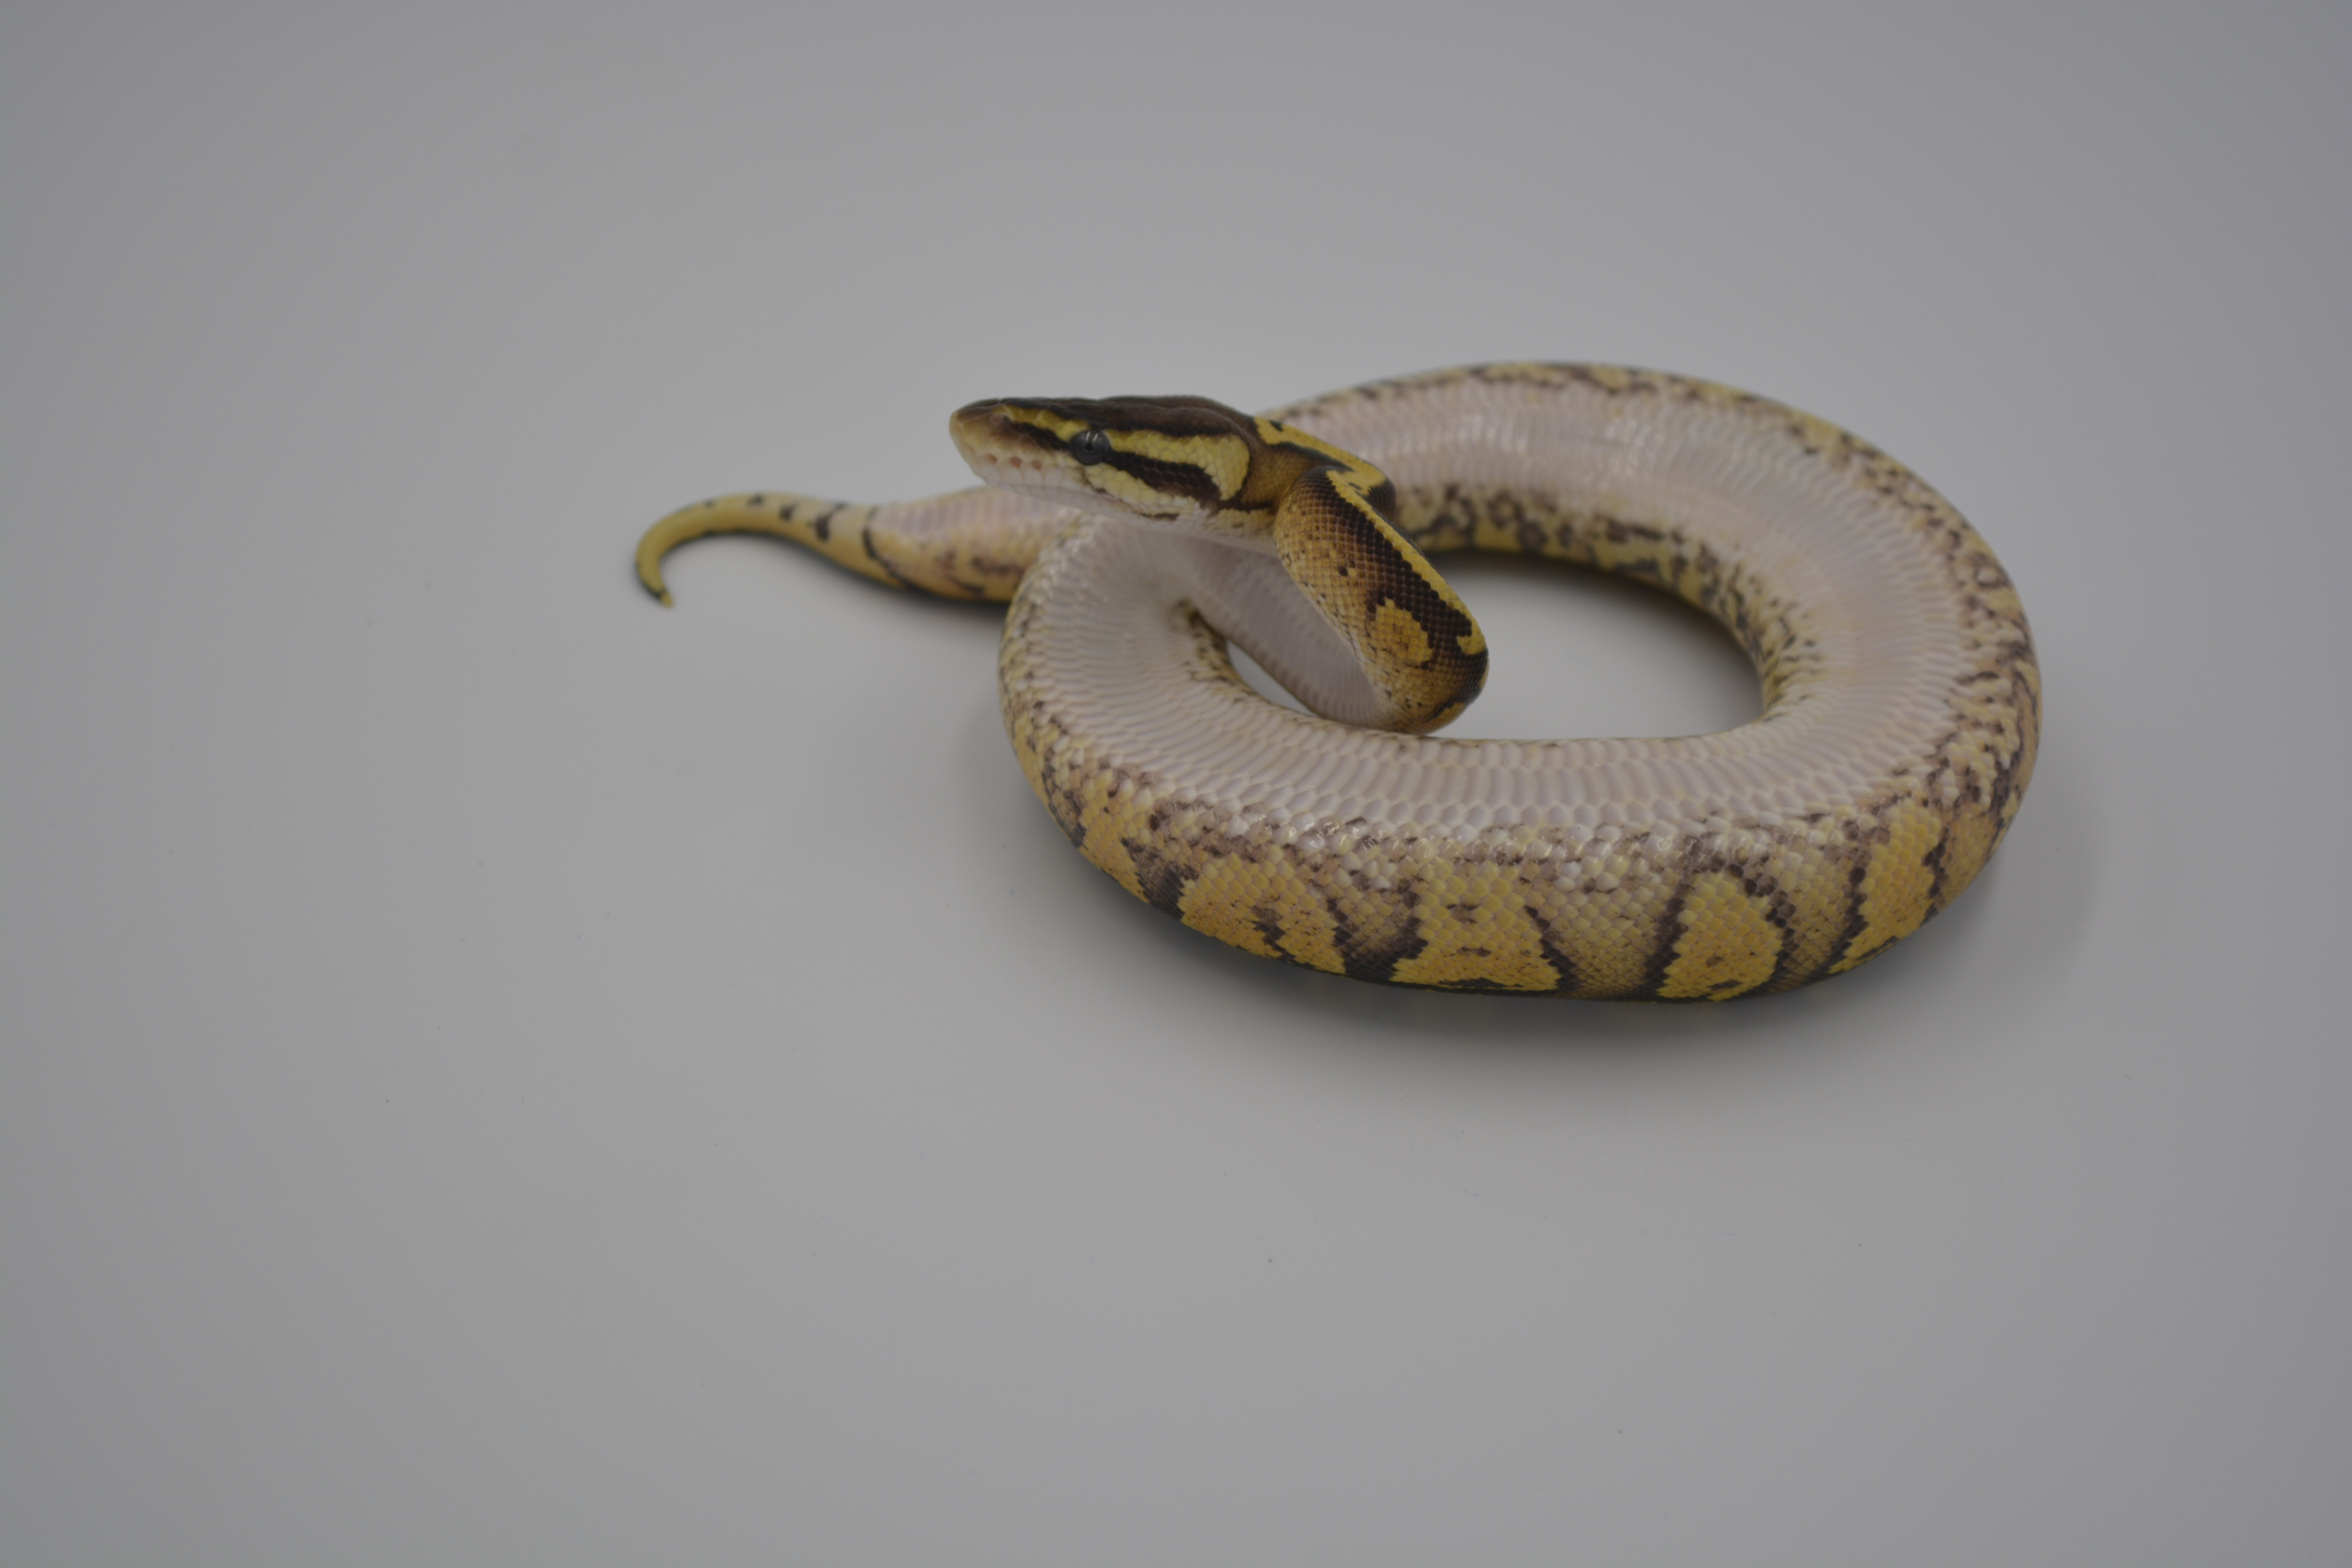 Paint Ball Python by Wreck Room Snakes